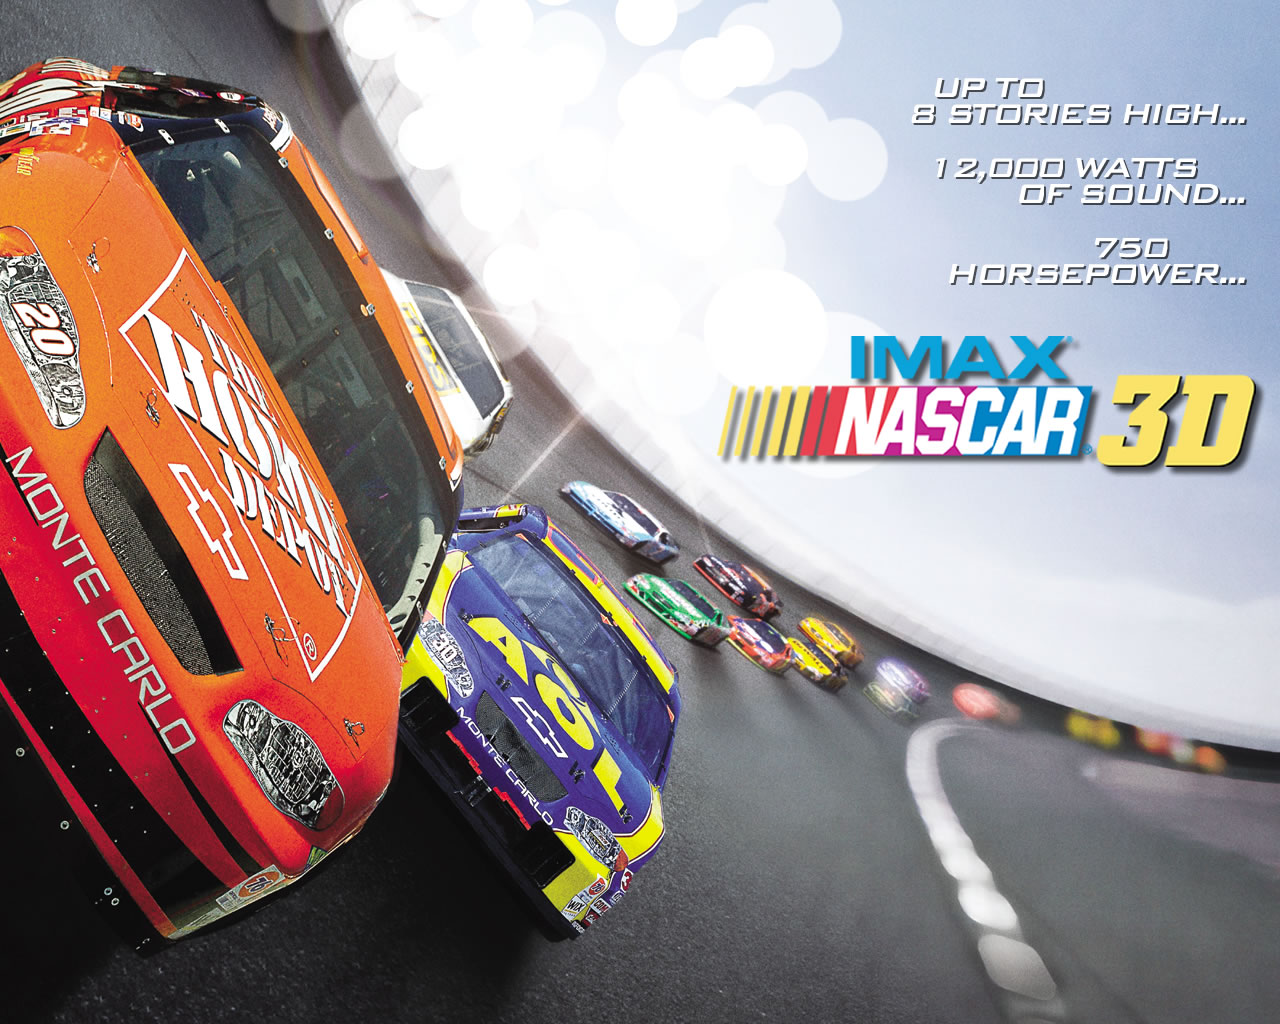 Nascar 3d The Imax Experience Wallpaper Original Size Now